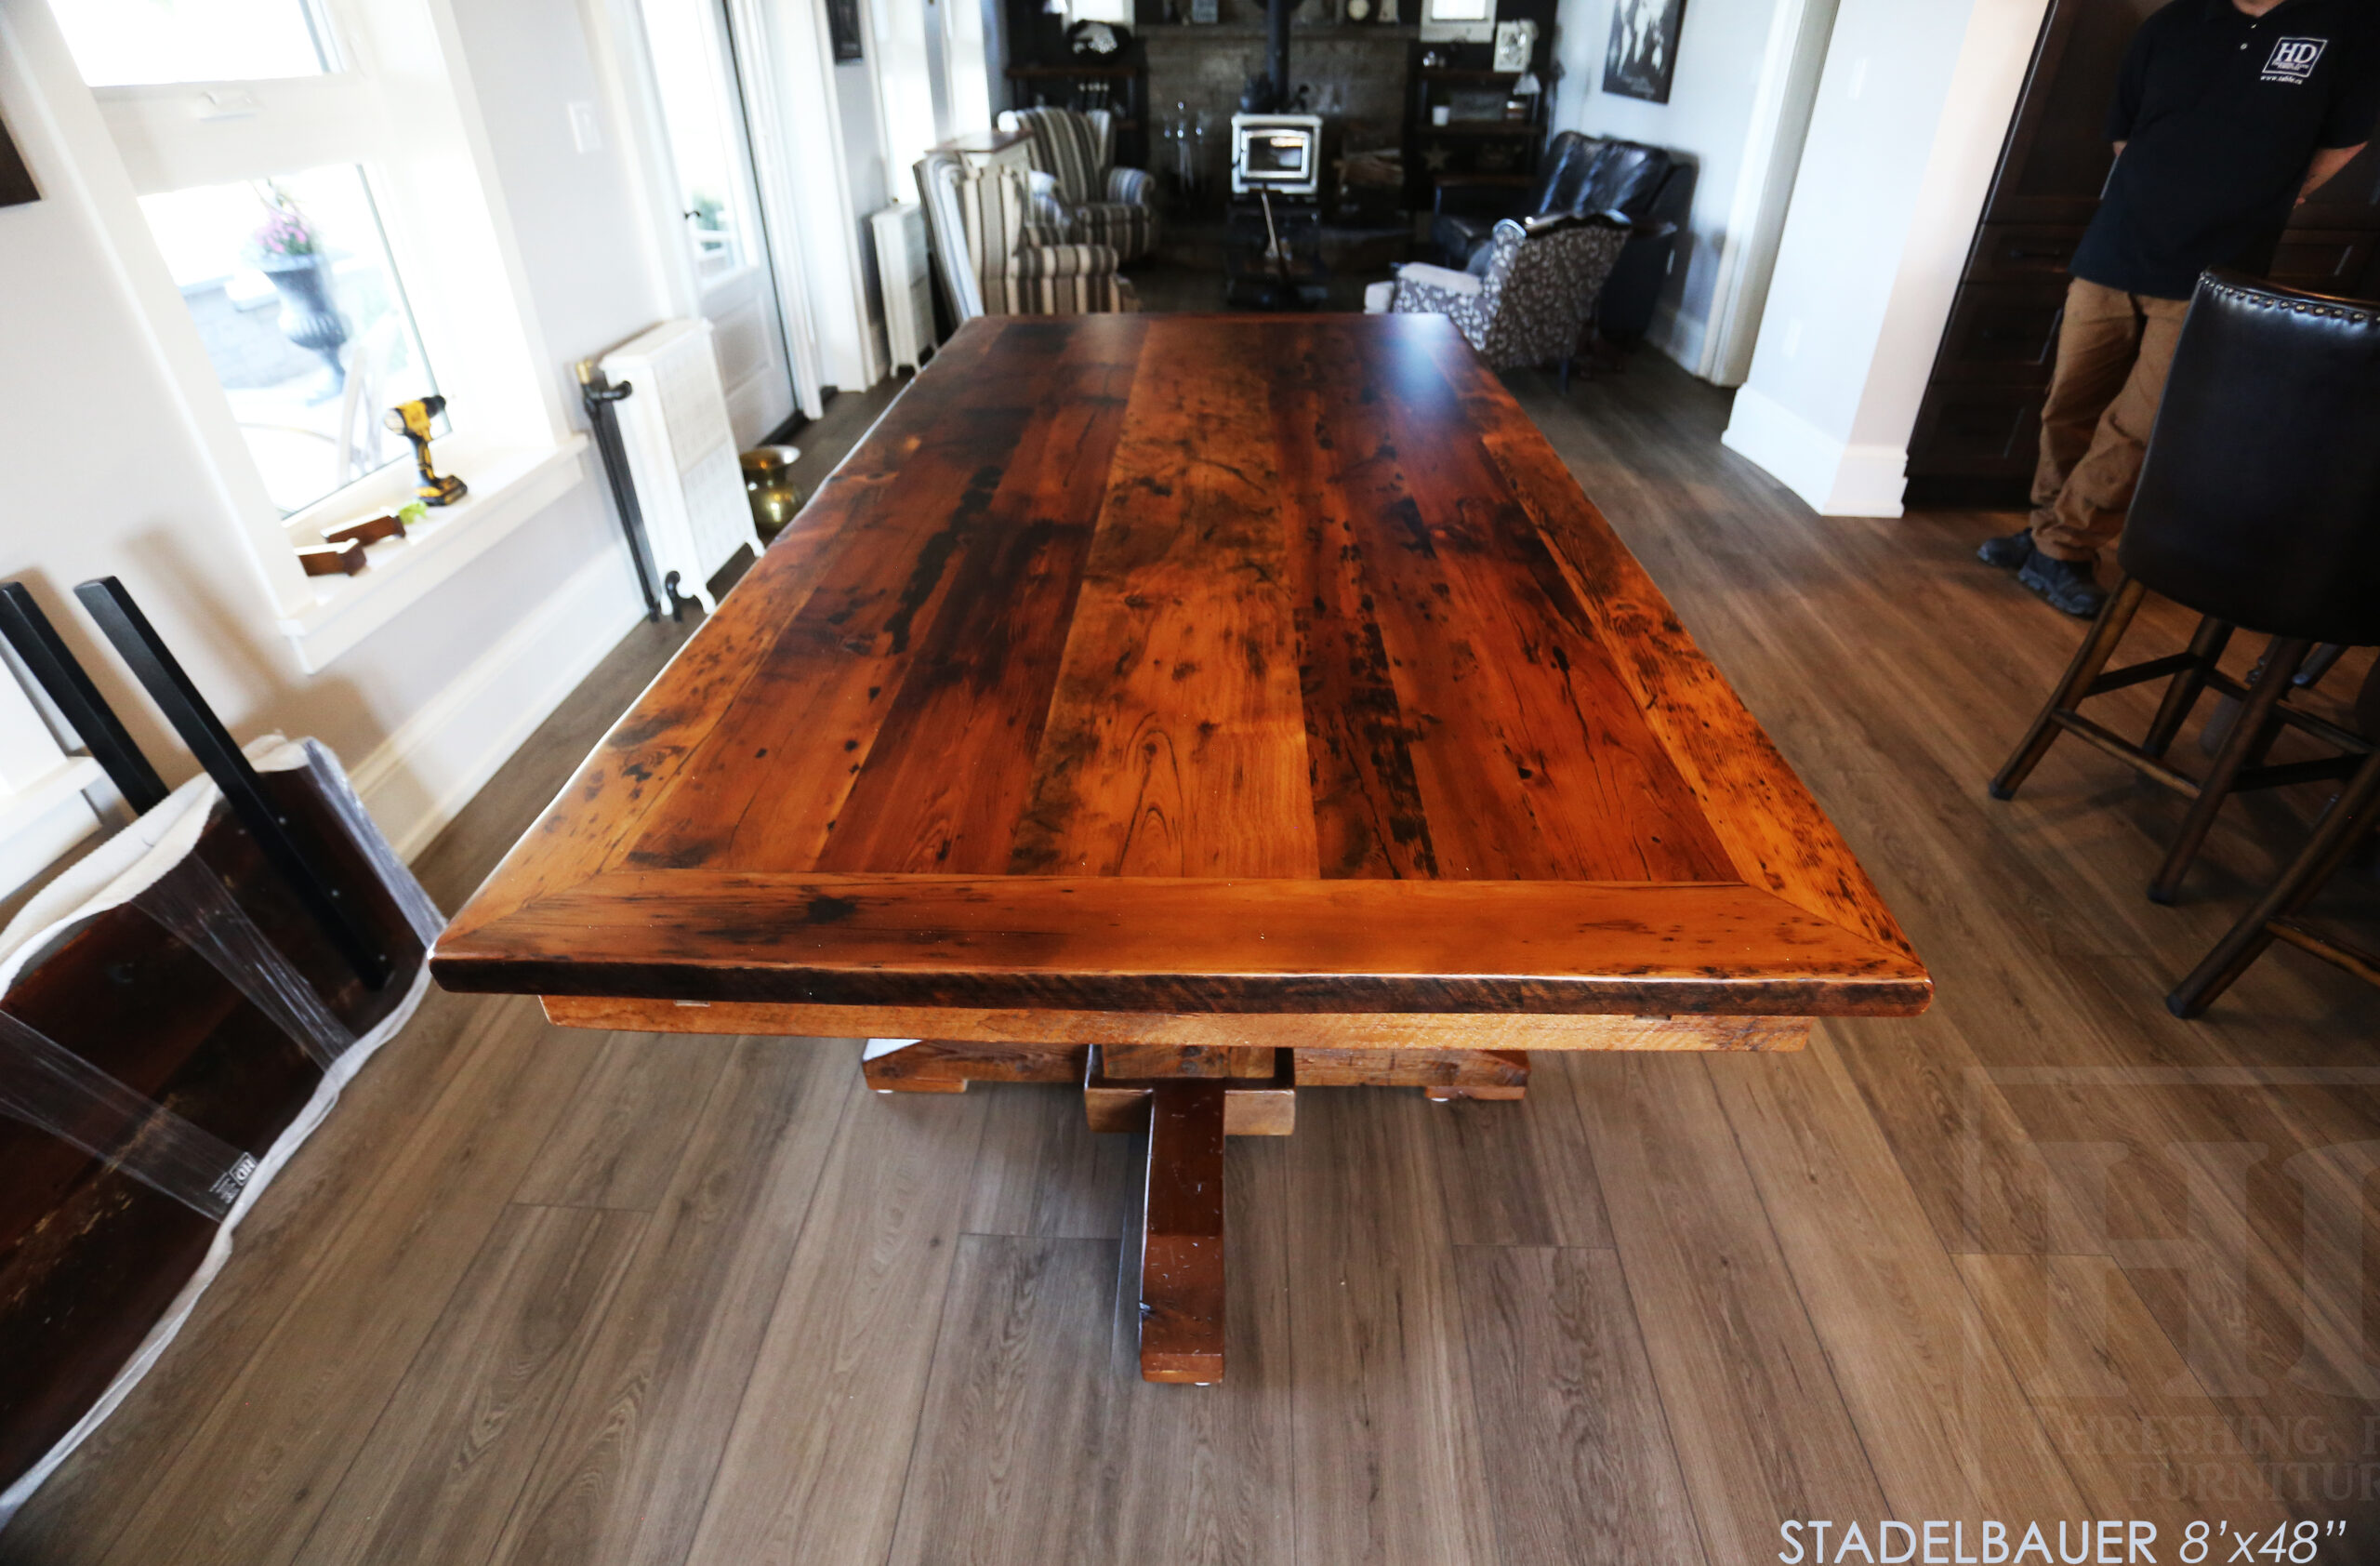 8â€™ Reclaimed Ontario Barnwood Table we made for a Beamsville, Ontario home â€“ 48â€ wide â€“  Hand Hewn Pedestals Base - Old Growth Hemlock Threshing Floor Construction - Original edges & distressing maintained â€“ Bread Edge Ends â€“ Premium epoxy + matte polyurethane finish â€“ [2] 18â€ leaf extensions â€“ [2] Drawers â€“ Lee Valley Hardware Cast Brass Handle - www.table.ca